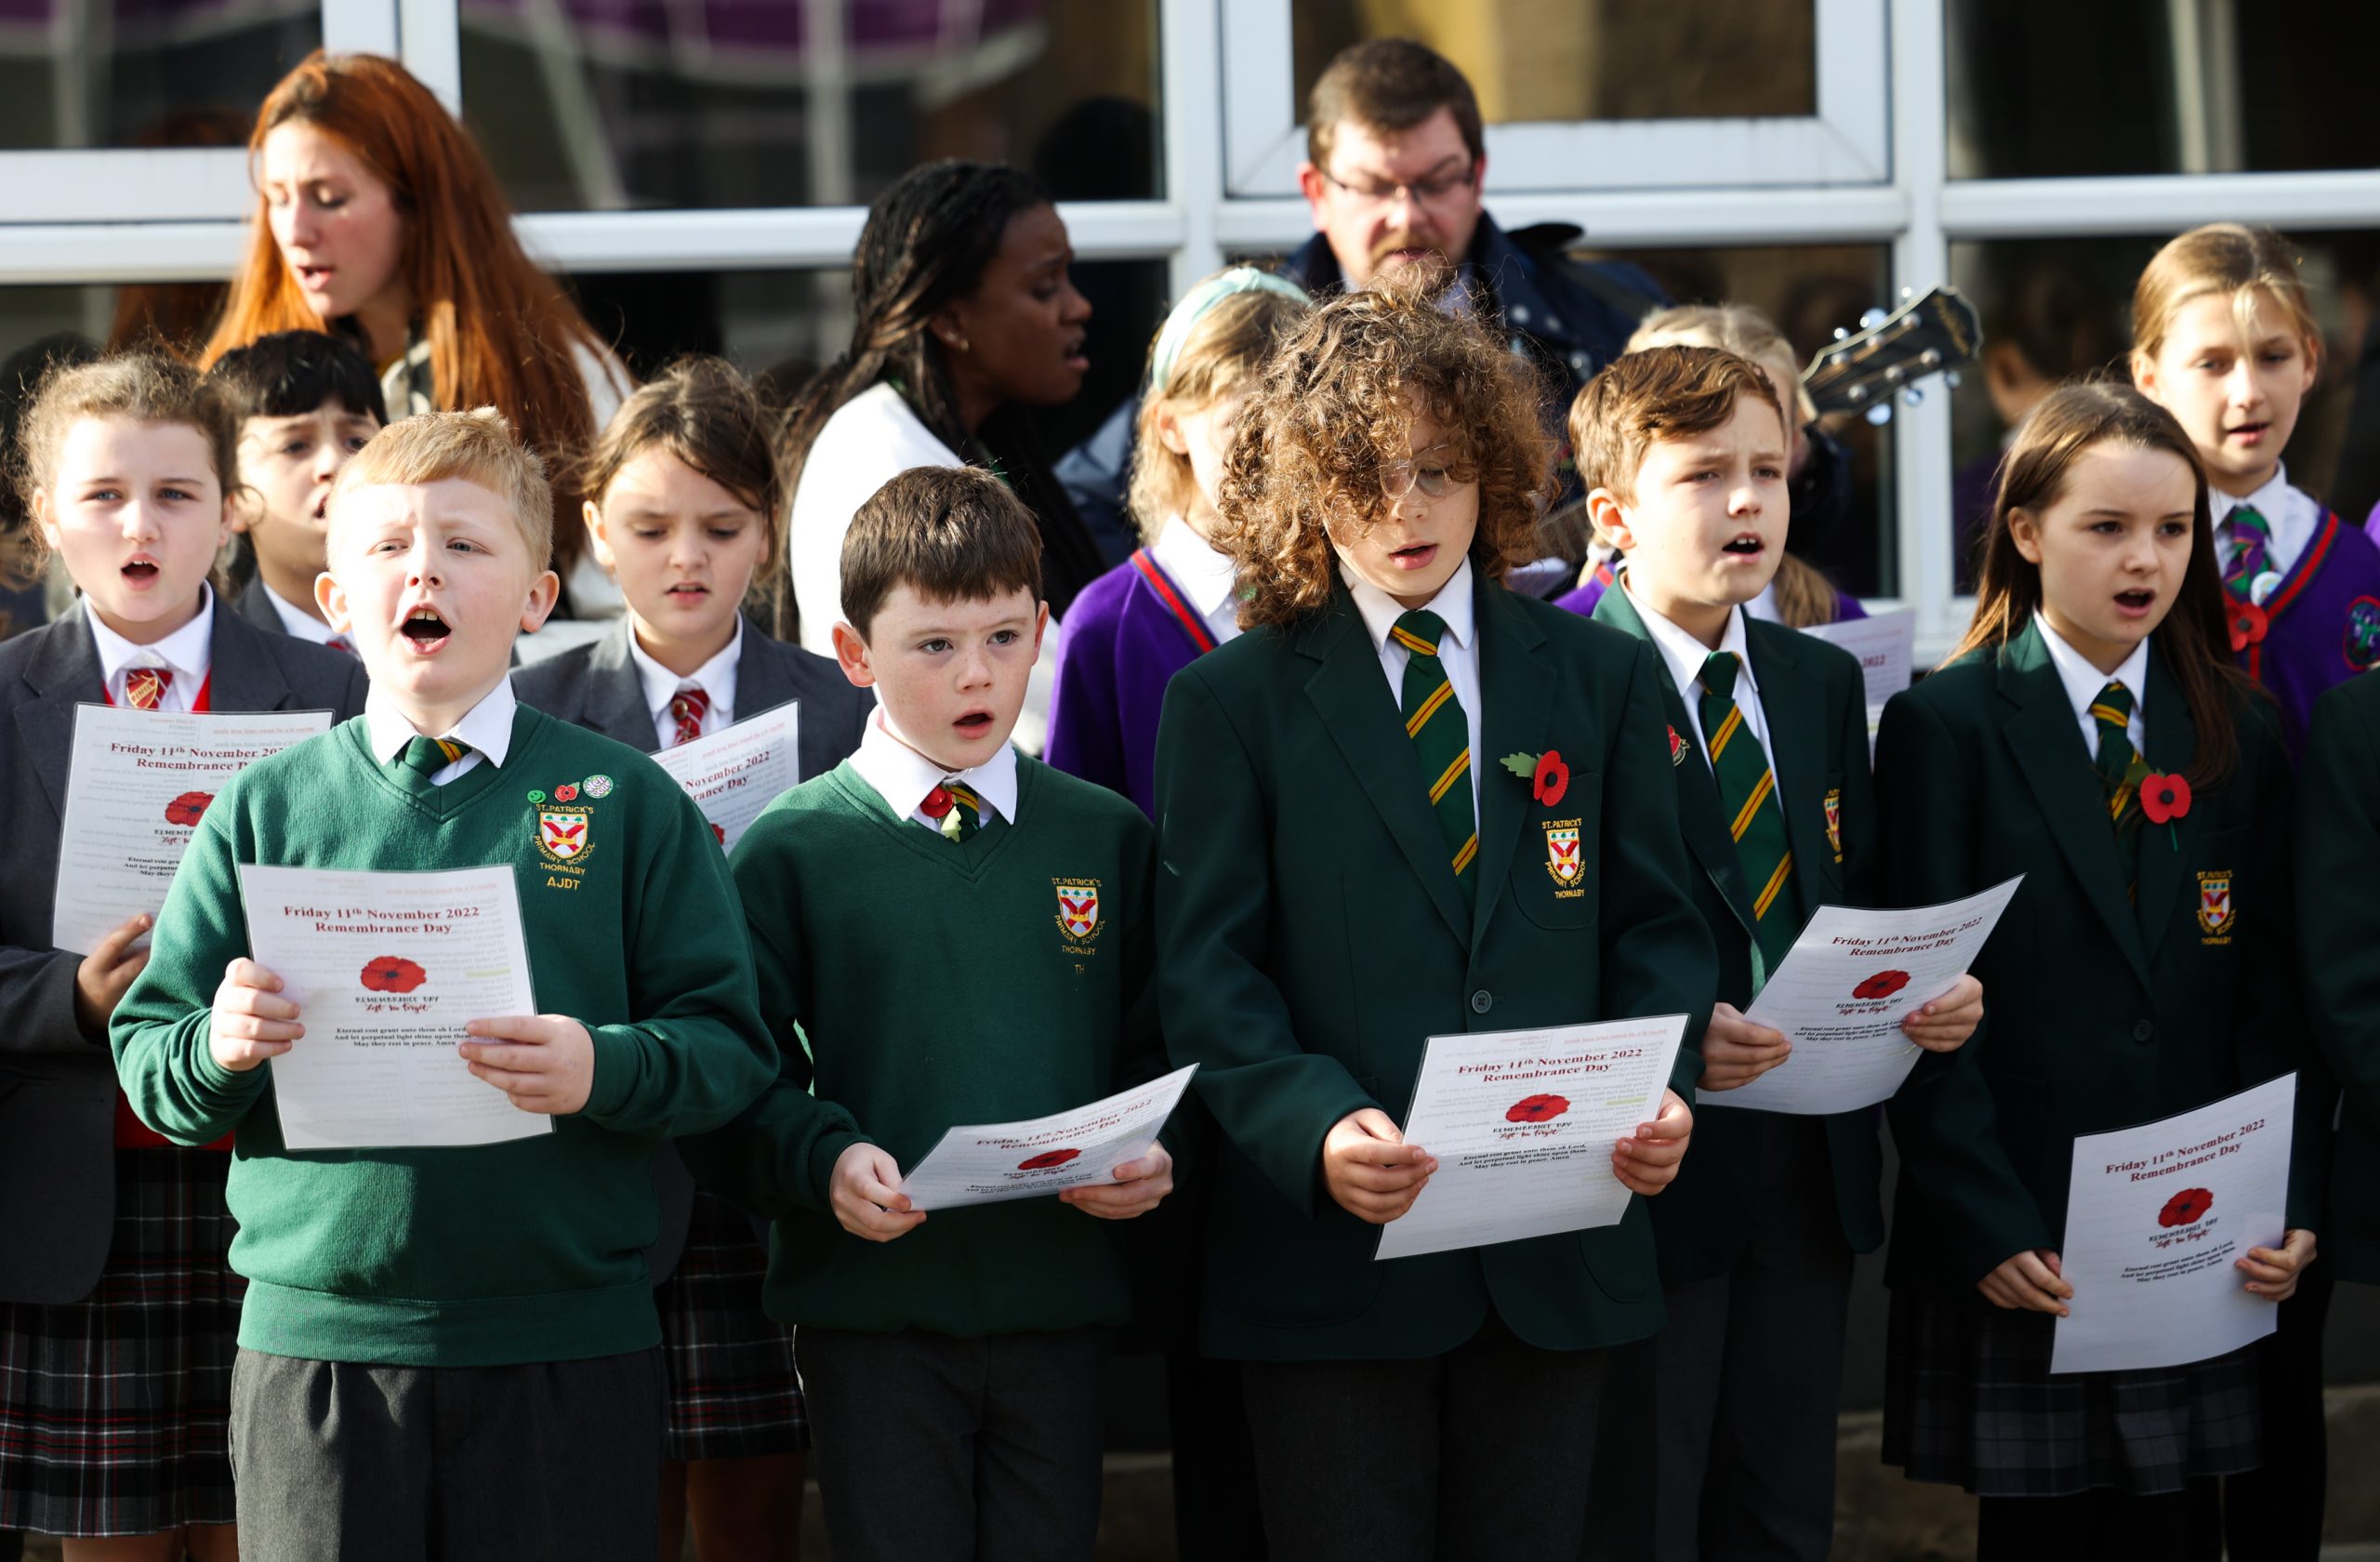 The Remembrance Service at Postgate House on November 11 2022